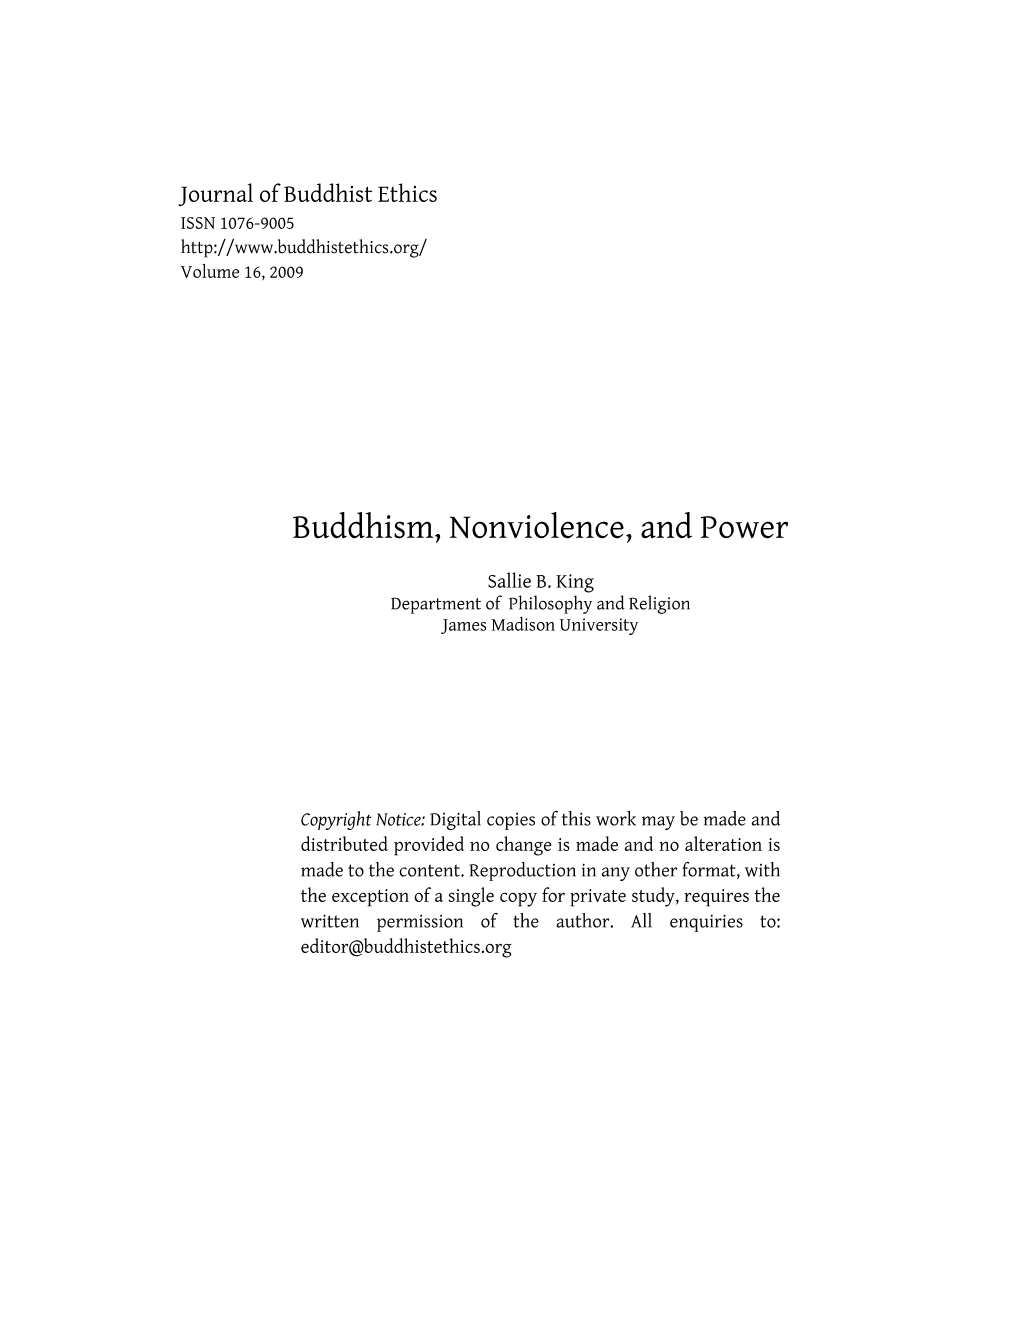 Buddhism, Nonviolence, and Power